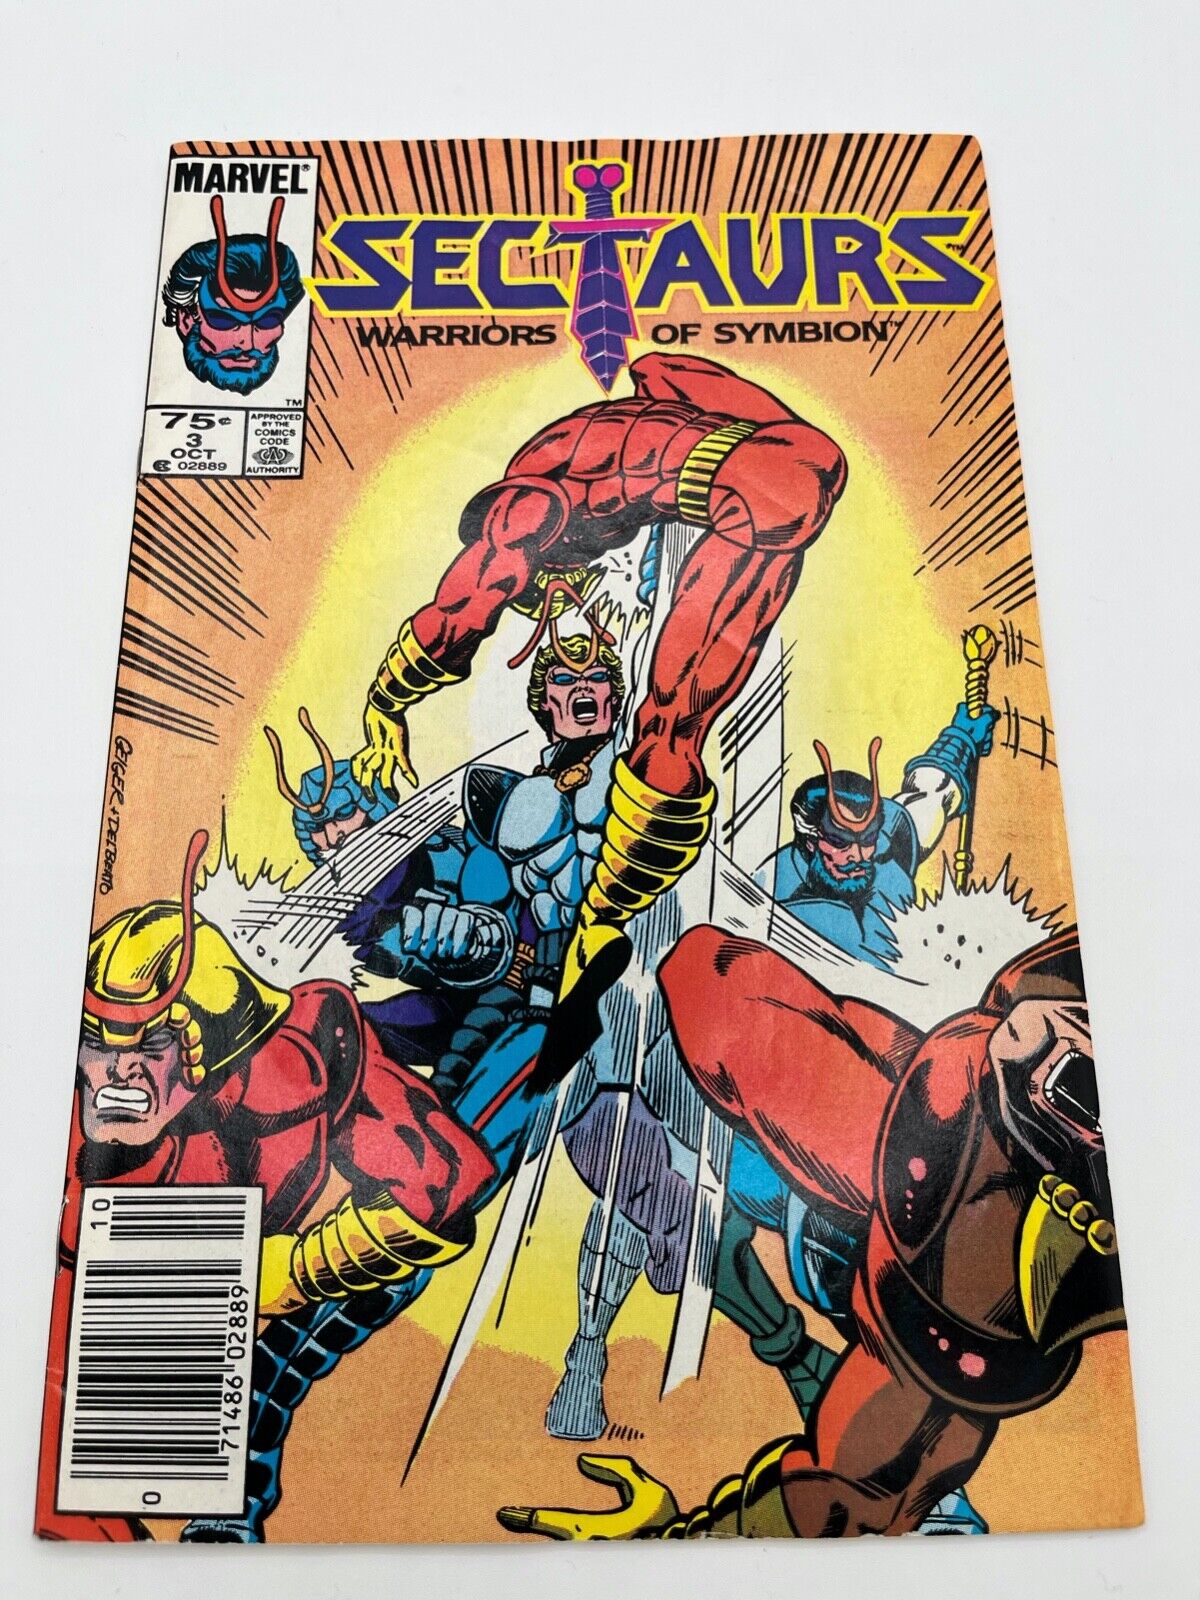 Sectaurs Warriors Of Symbion #3 Marvel 1985 Pre-Owned Very Good